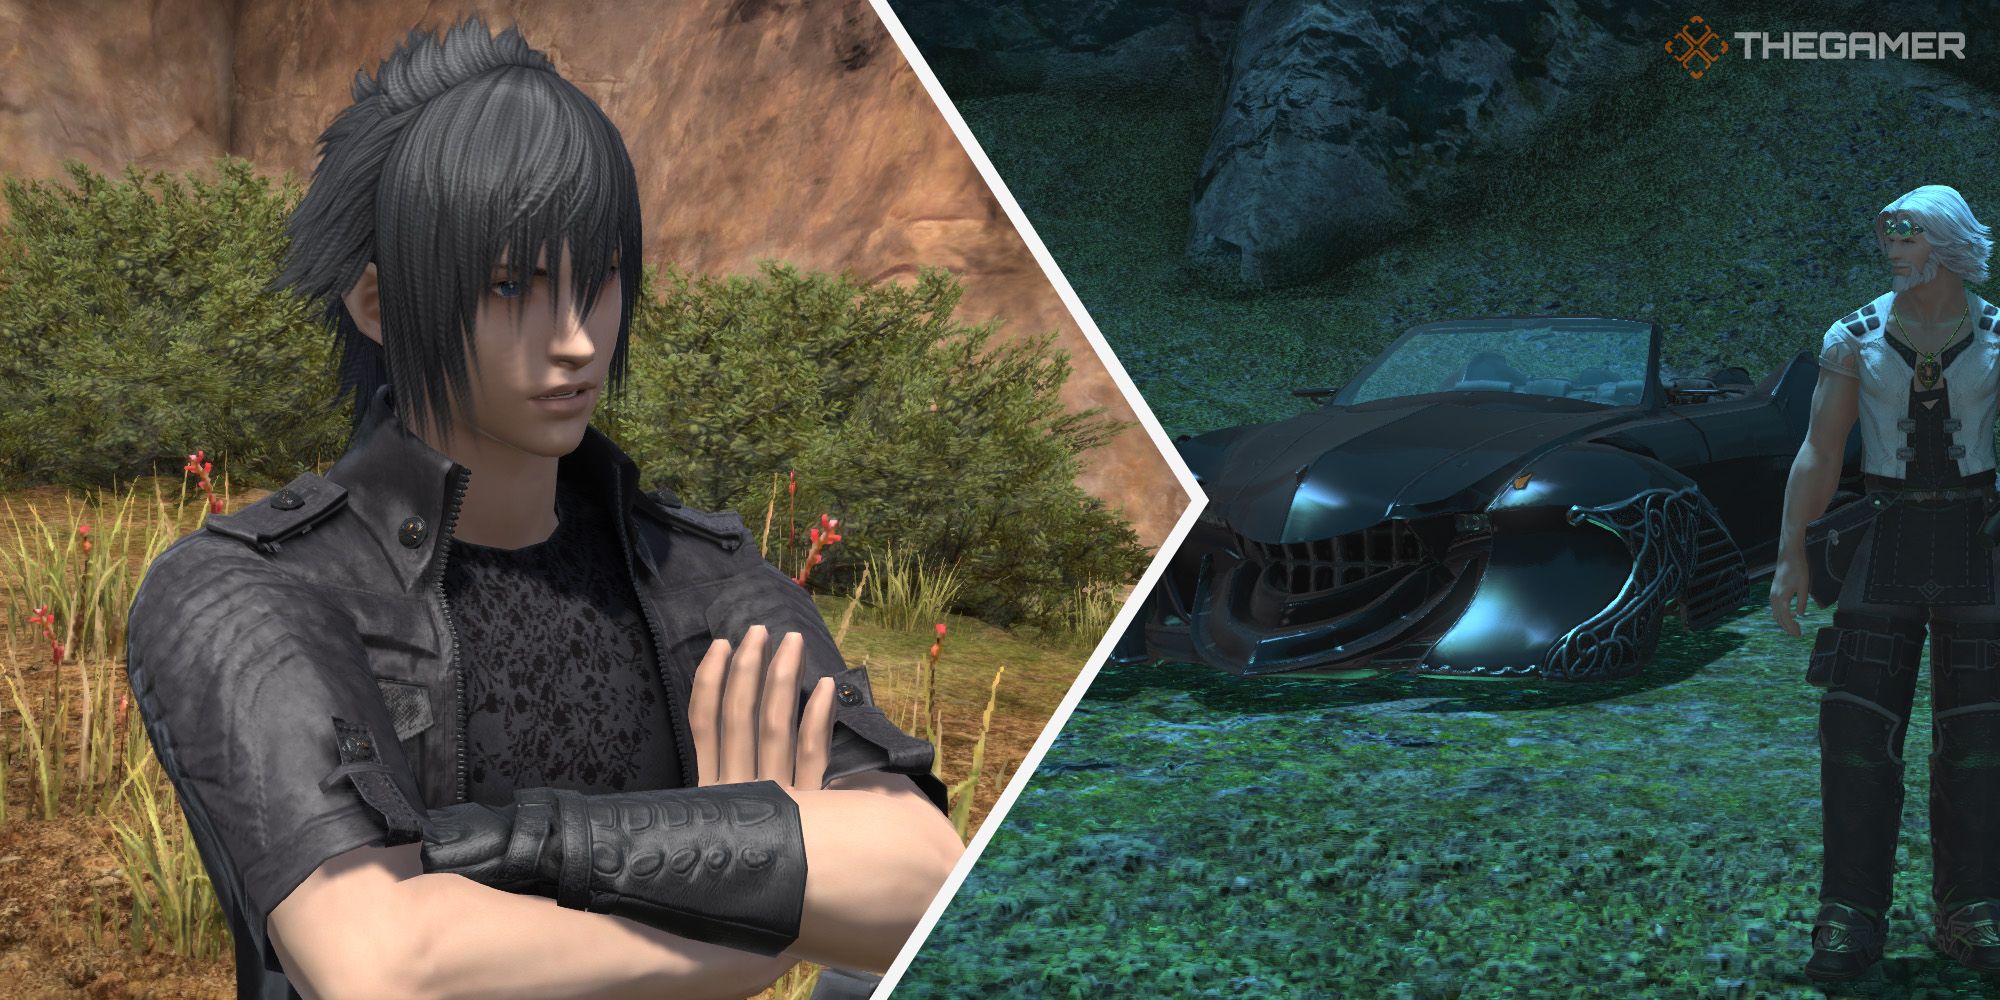 Final Fantasy 14 crossover event A Nocturne for Heroes split image of Noctis and then Cid beside the Regalia.